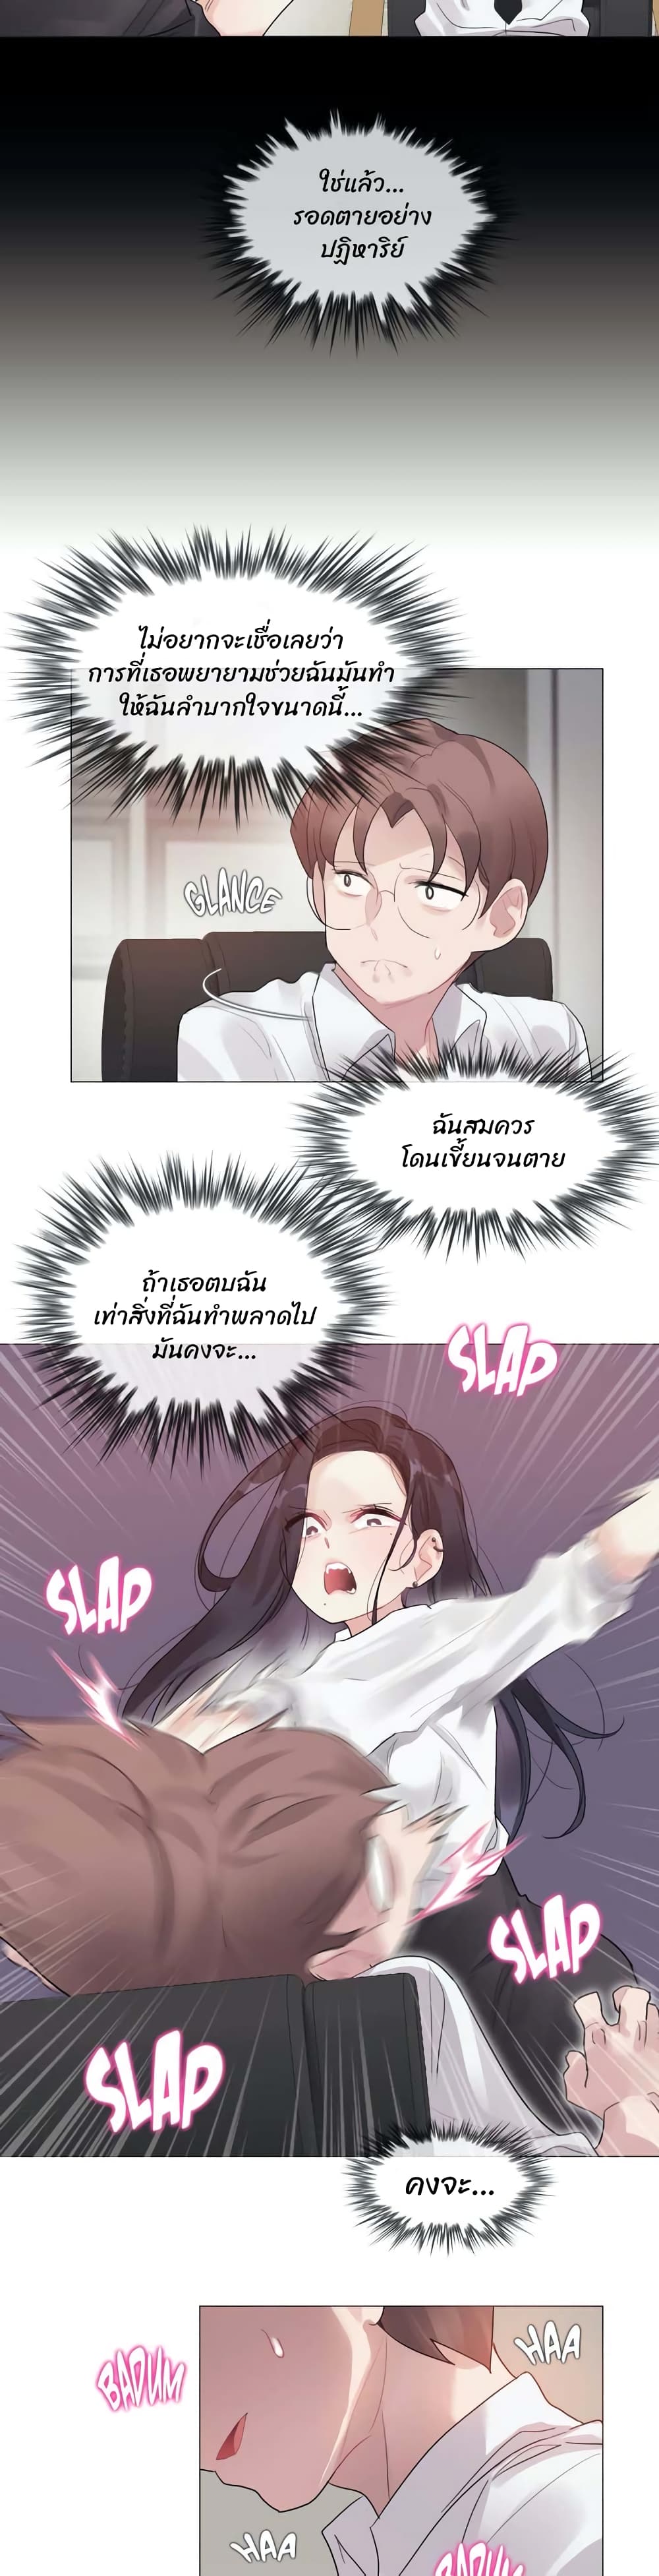 A Pervert’s Daily Life 93 (5)